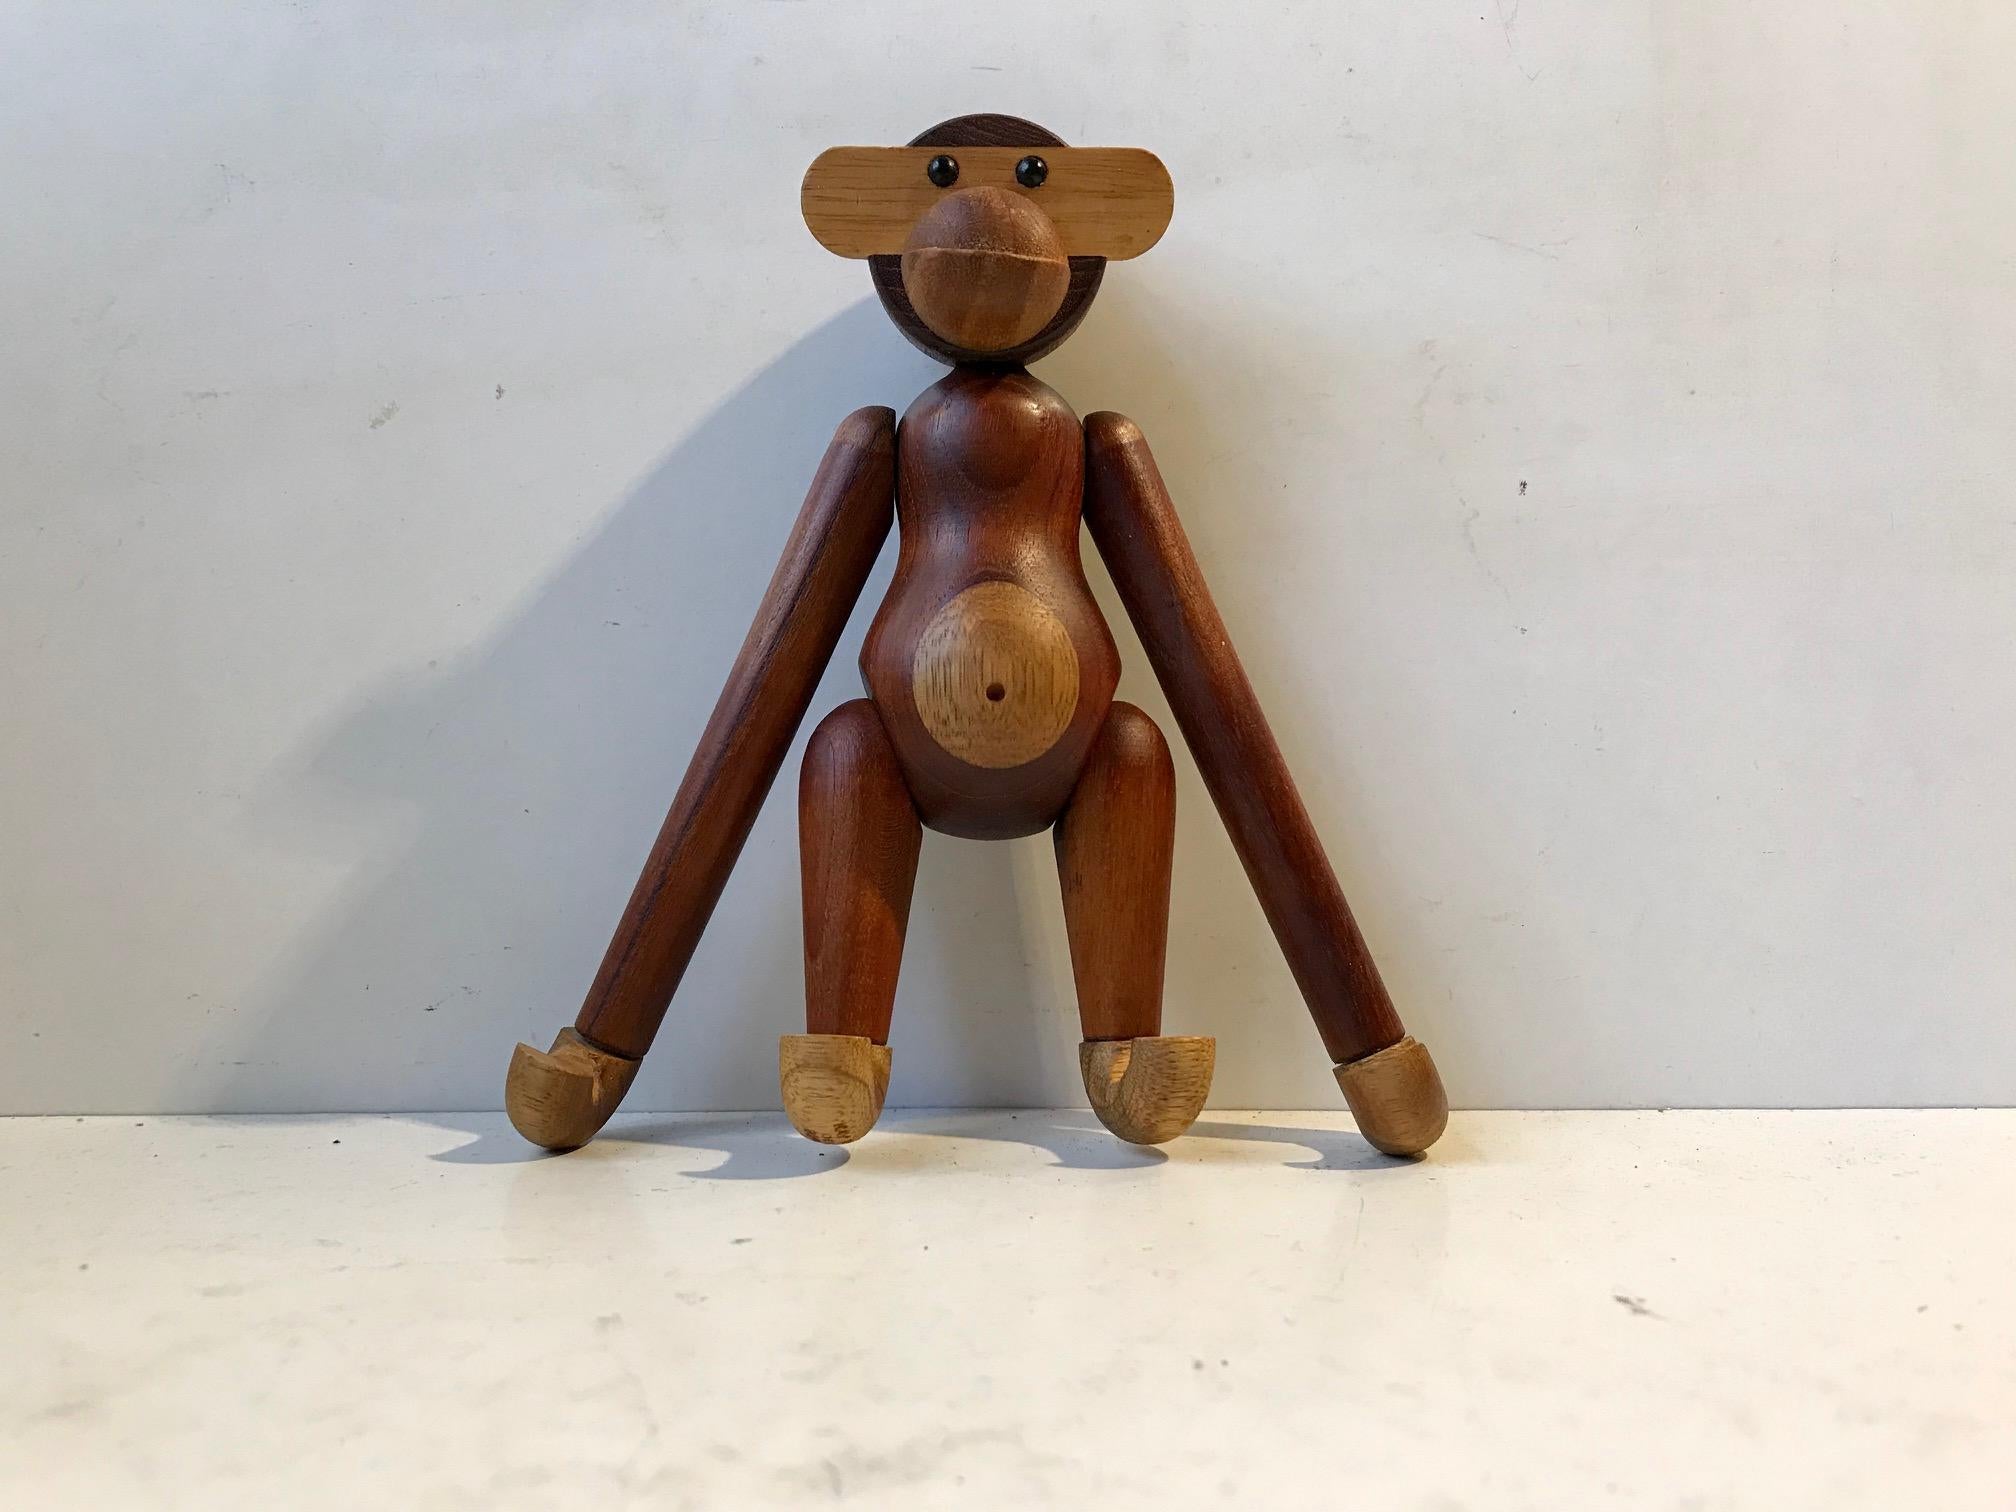 Wooden monkey designed by Kay Bojesen in 1951. Its made from solid teak and limba wood. It features articulated limbs, movable heads, arms and legs. This example was manufactured in Denmark during the 1970s.